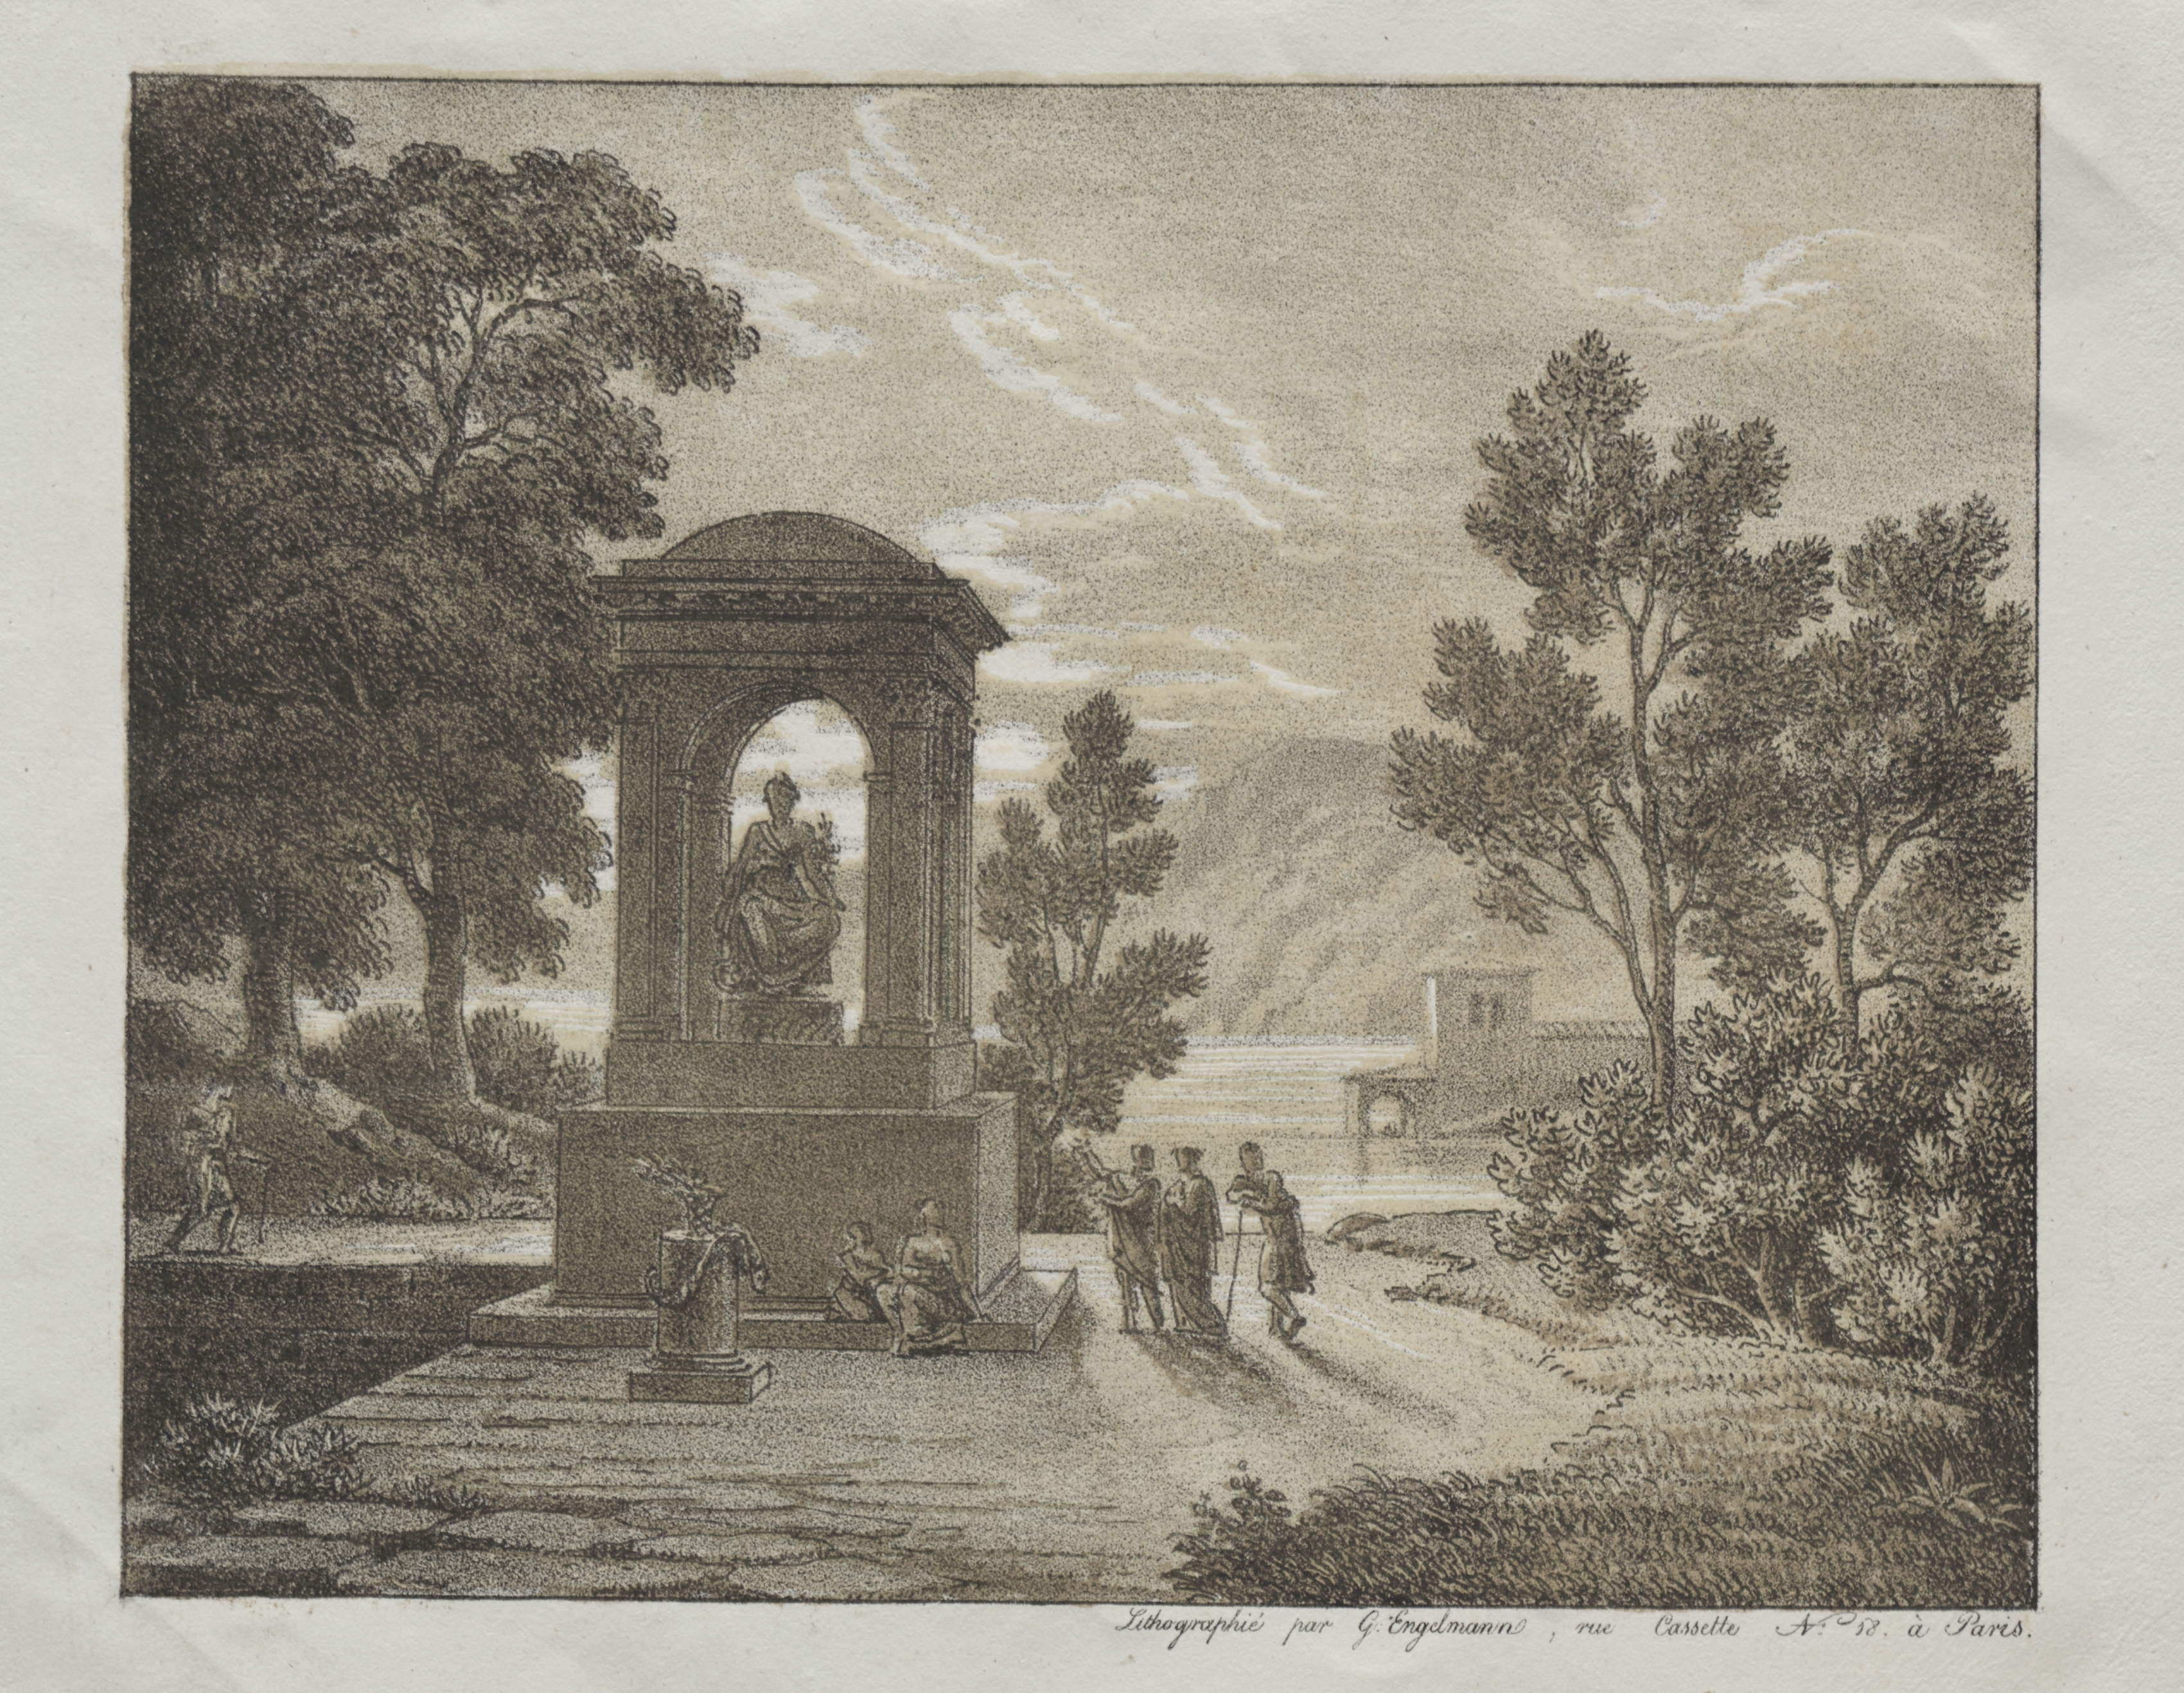 Book of Lithograph Trials using different means of Drawing such as Crayon, Pen, Brush, and Wash:  A Landscape